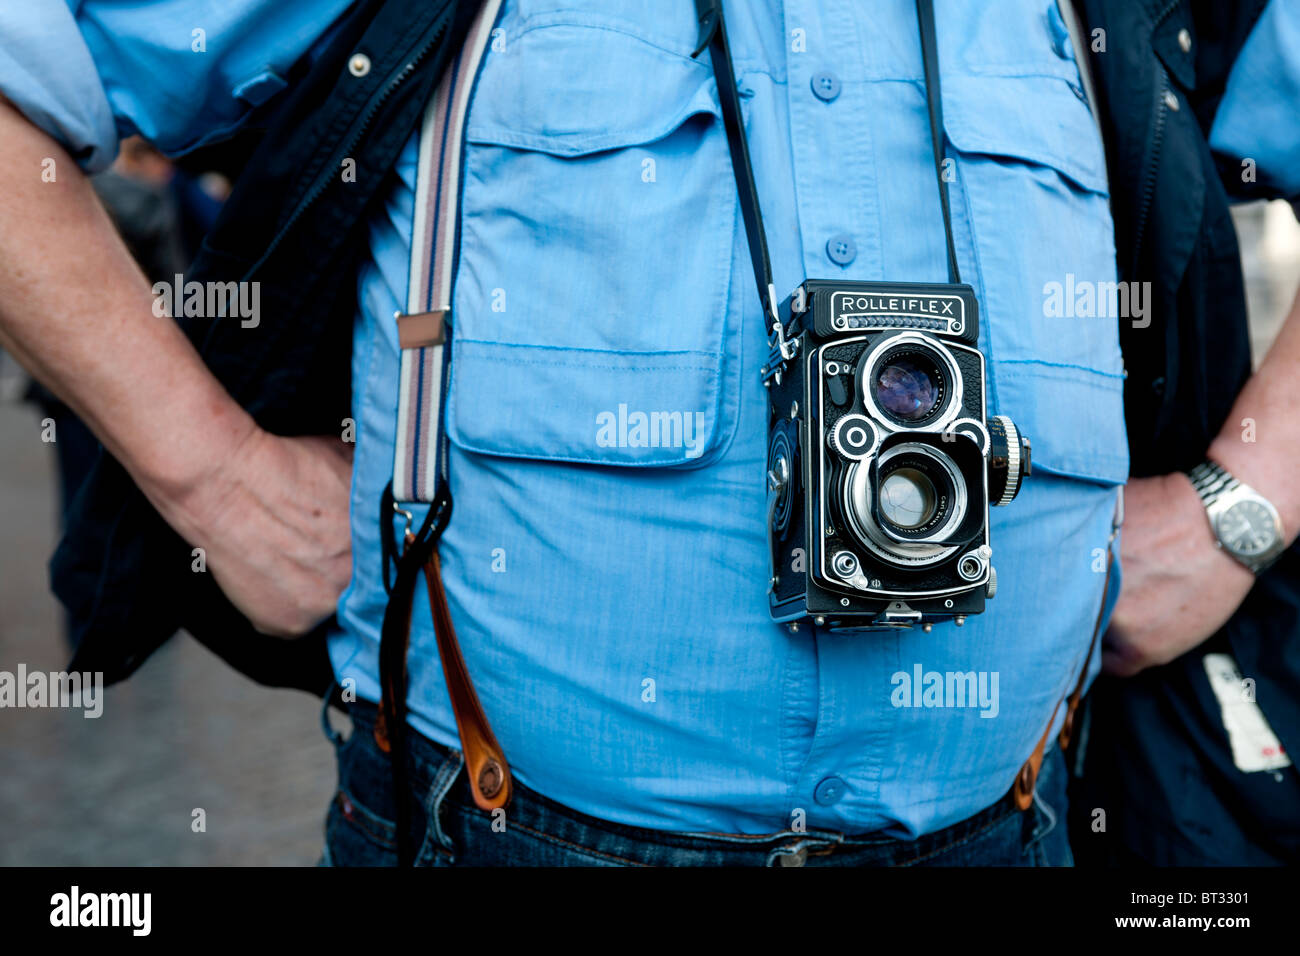 Twin lens Rolleiflex camera in use on male tourist in Rome, Italy. Stock Photo